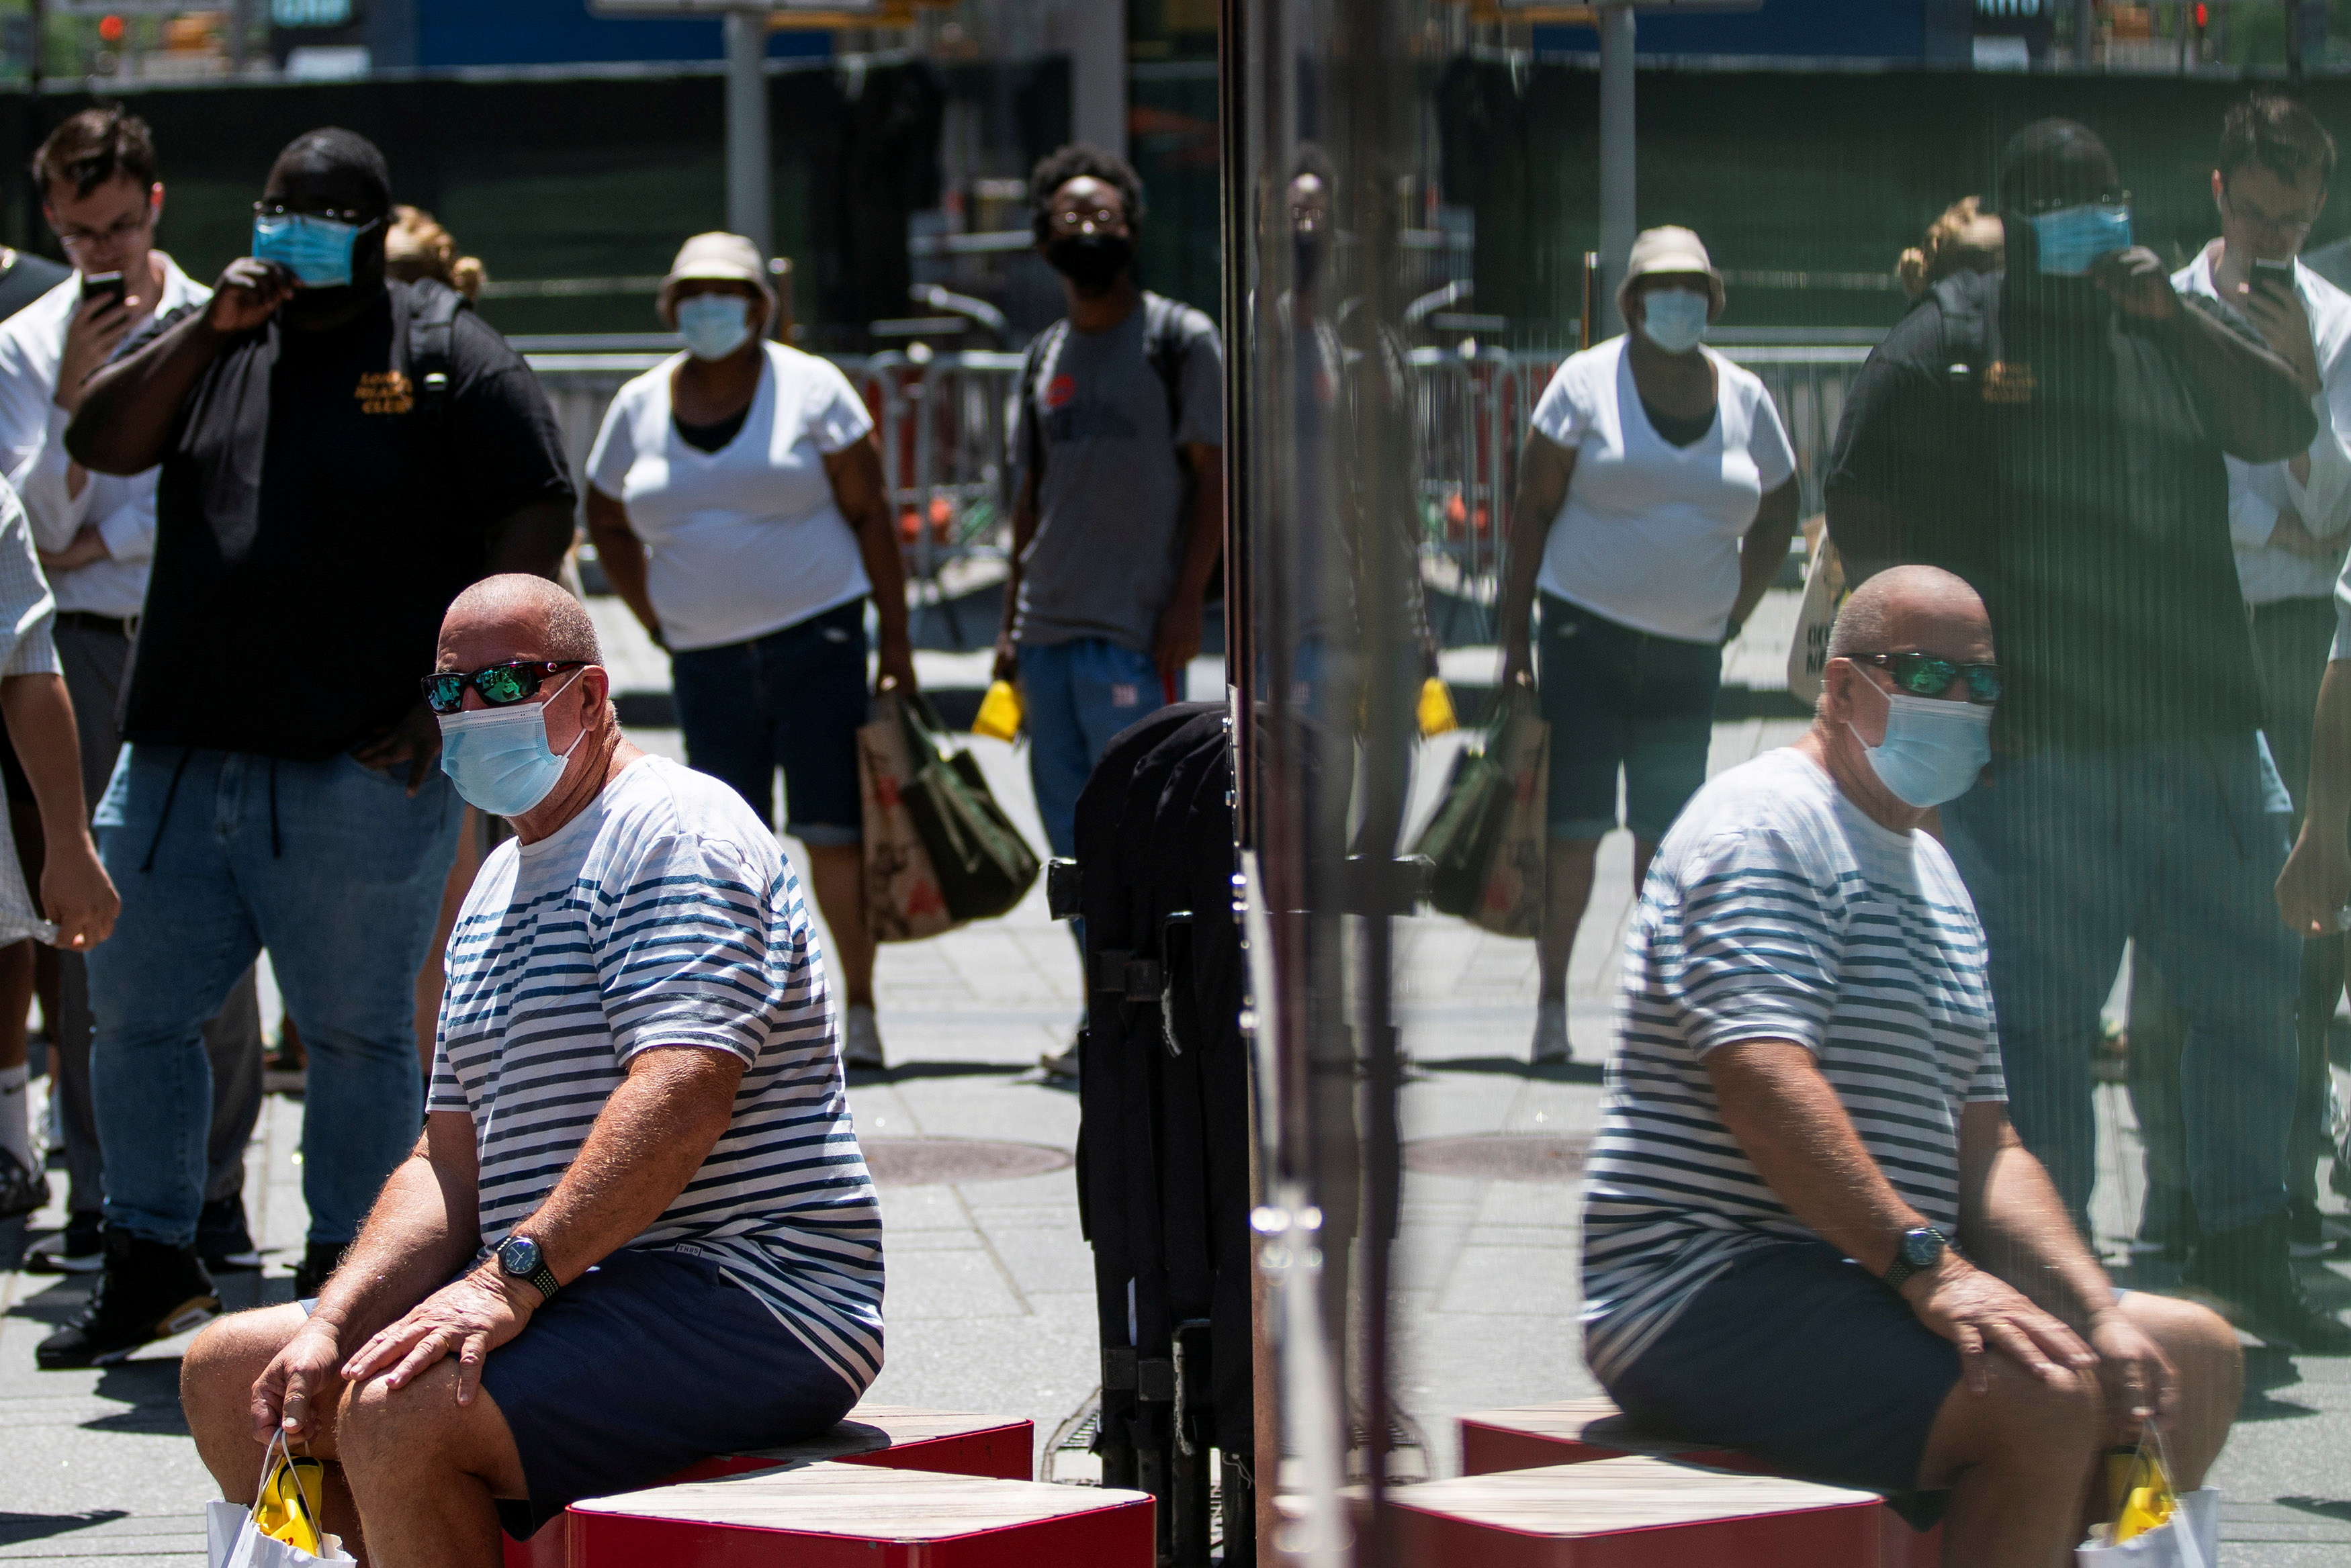 People wear masks to prevent against the spread of the coronavirus disease (COVID-19) in New York